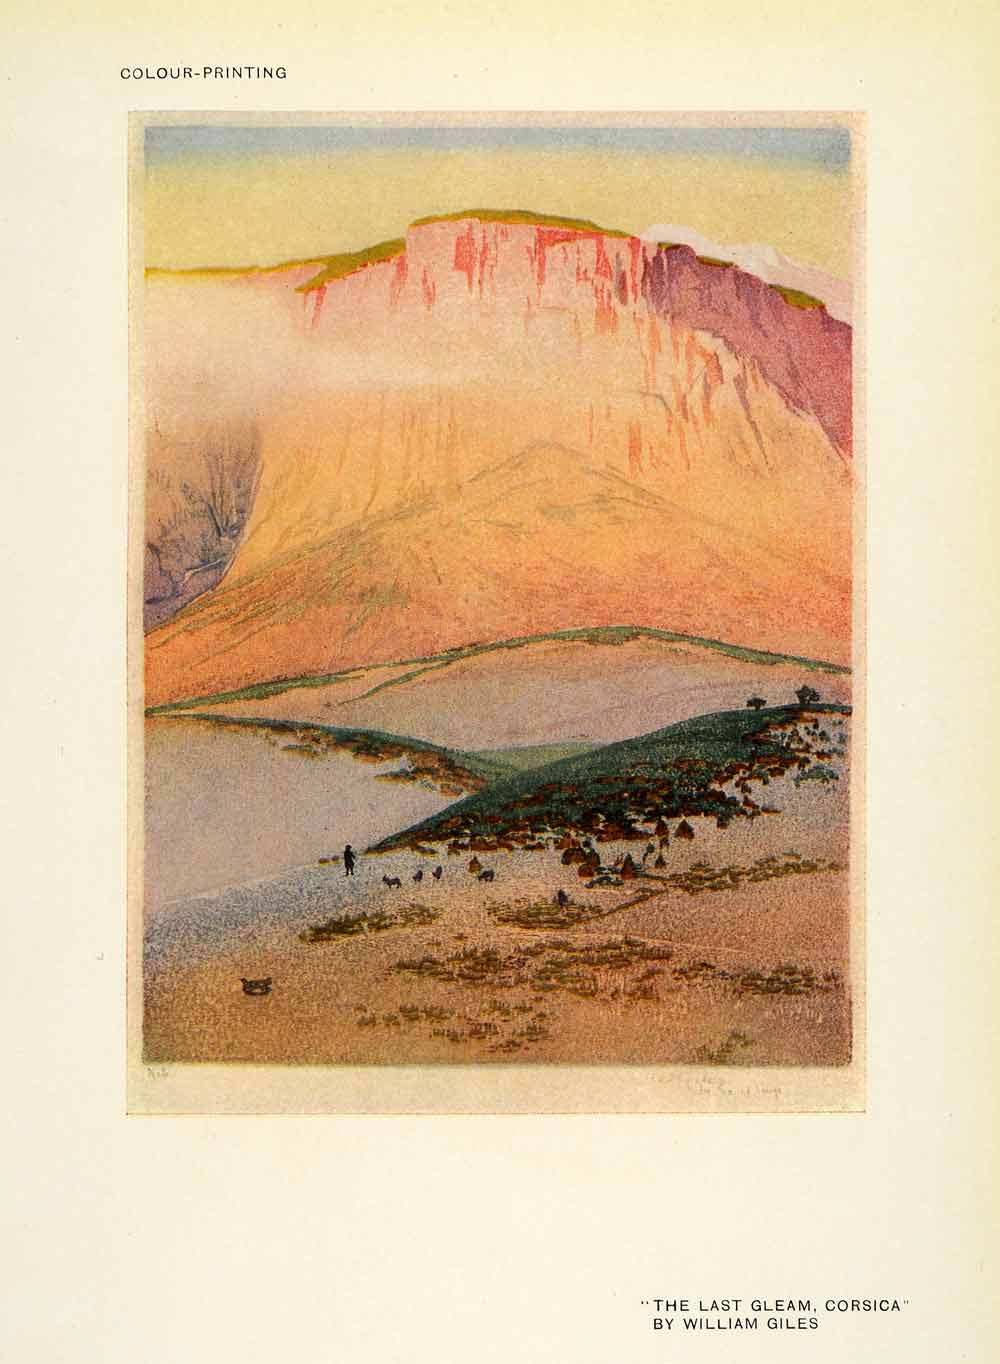 1917 Print William Gilies Art Corsica Landscape French Island Natural XAC8